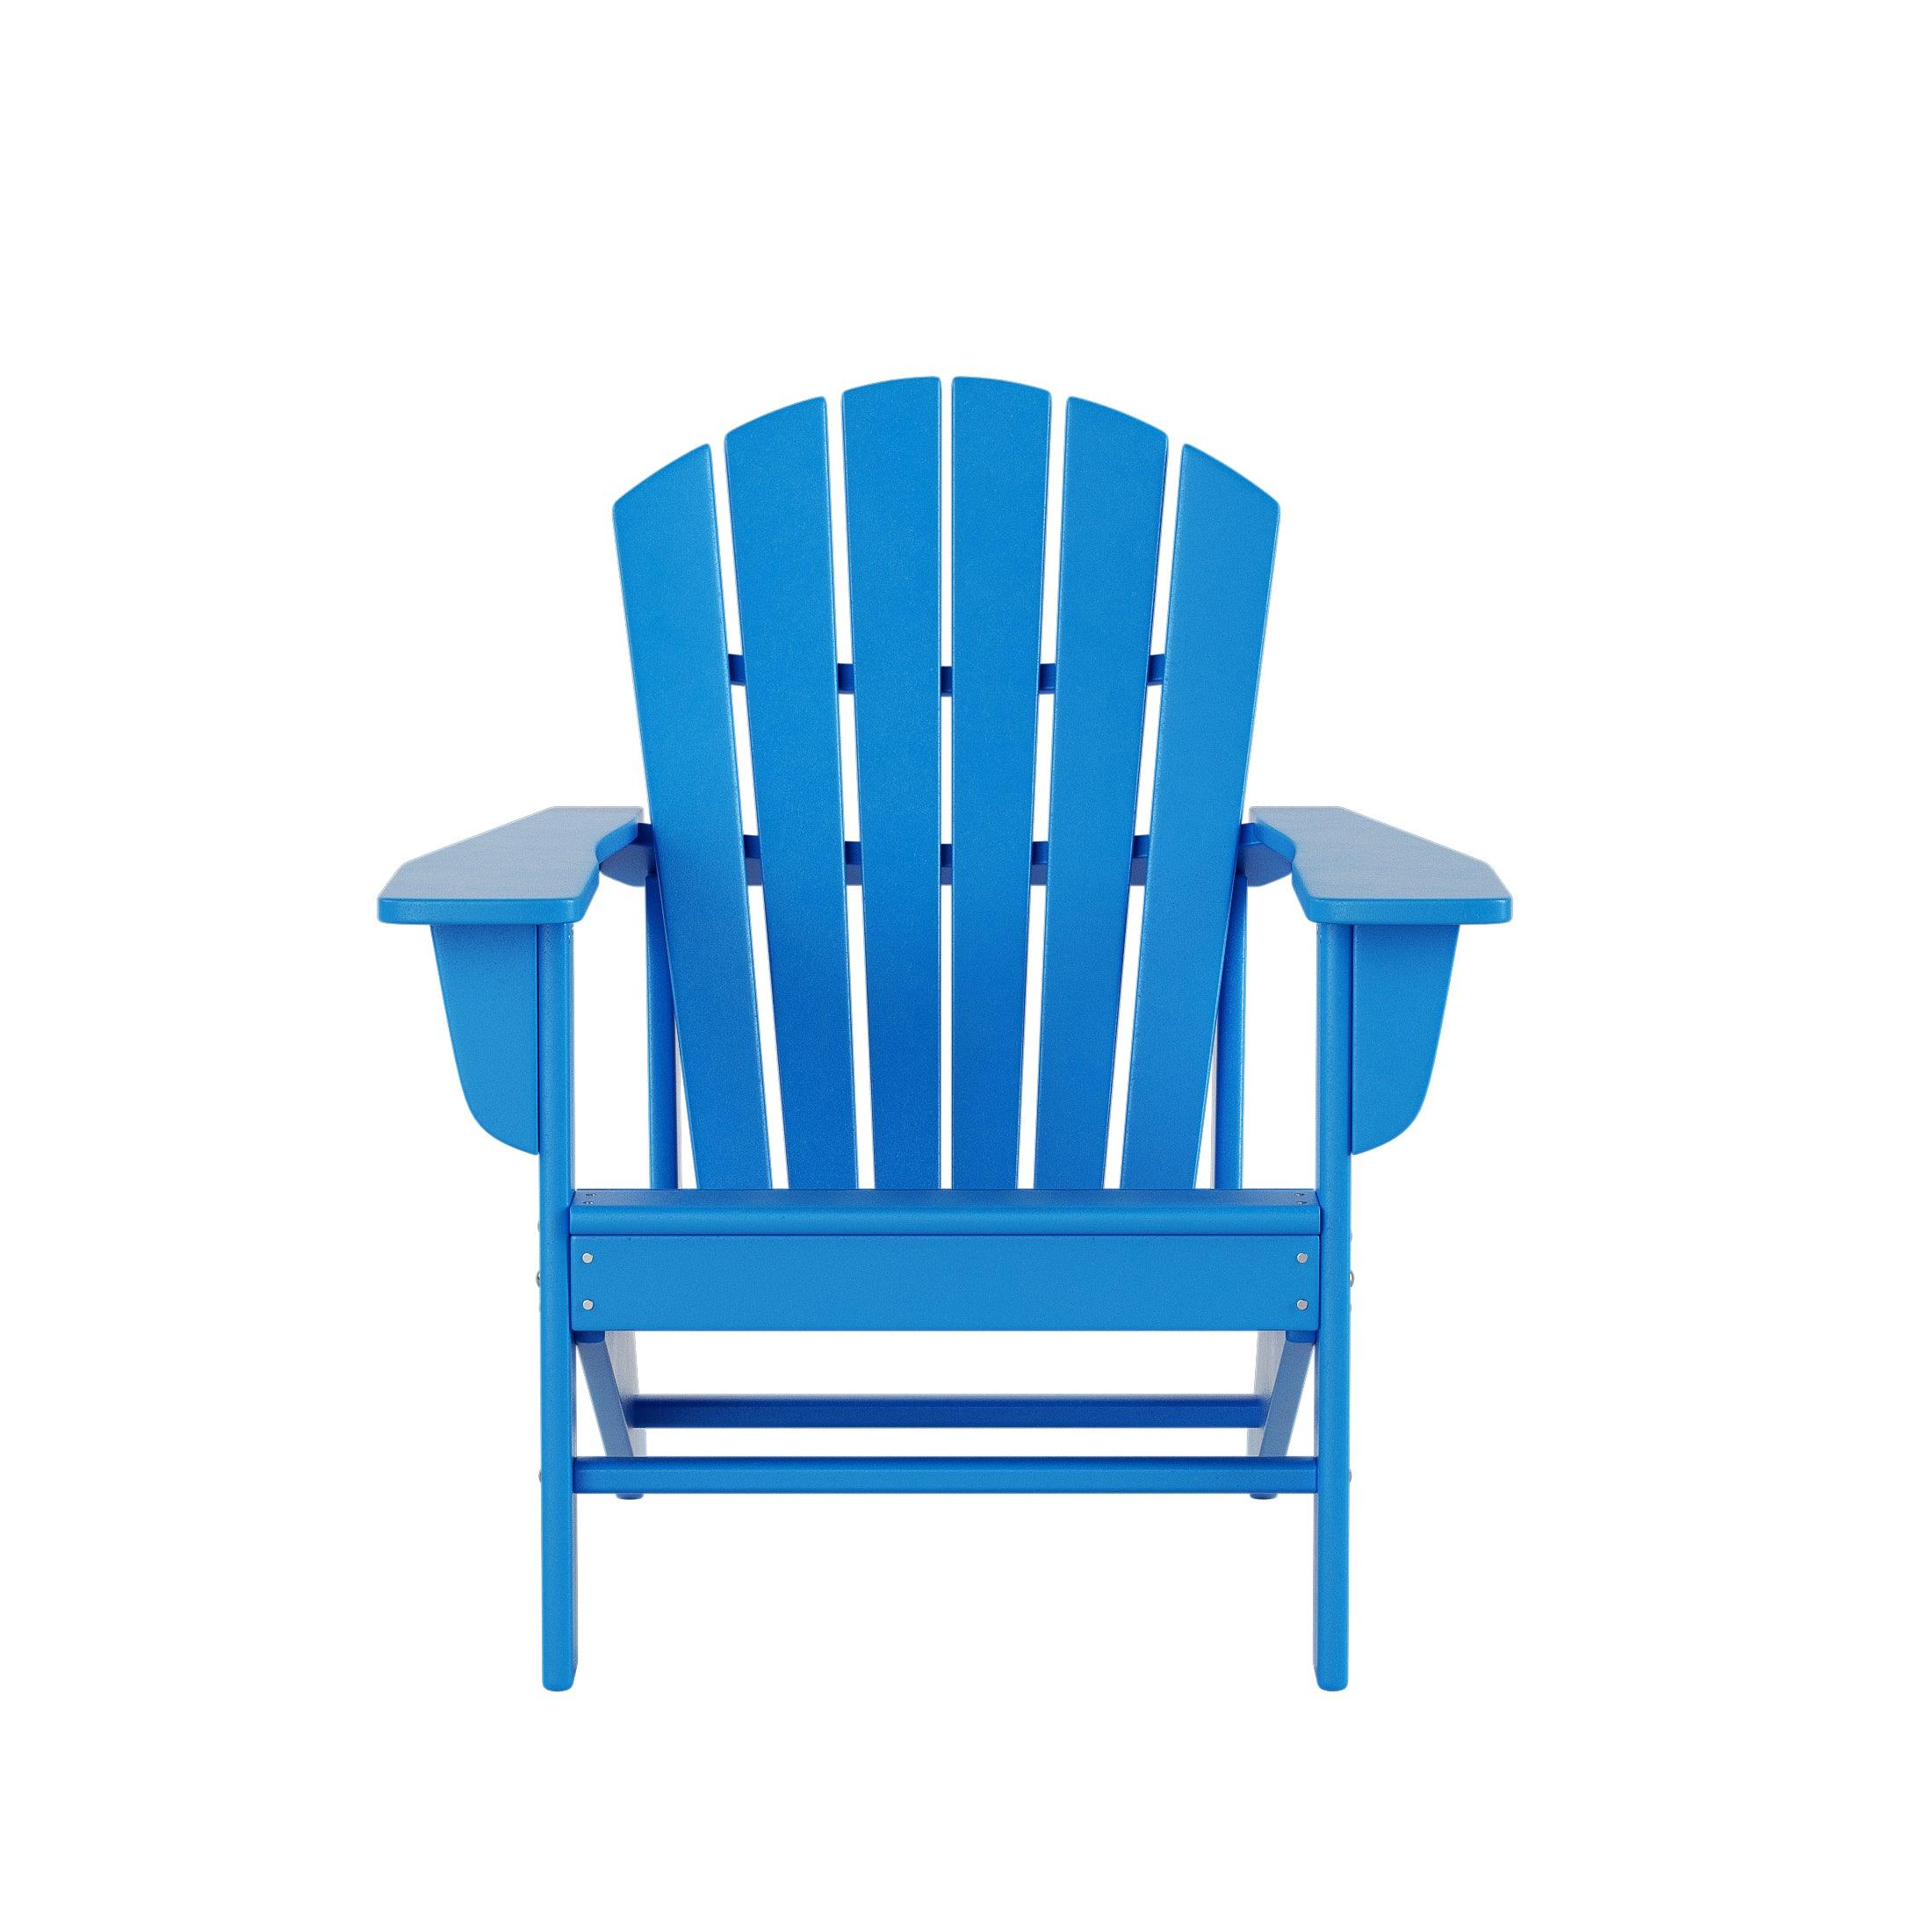 Costaelm Outdoor Adirondack Chair With Ottoman 2-Piece Set, Pacific Blue